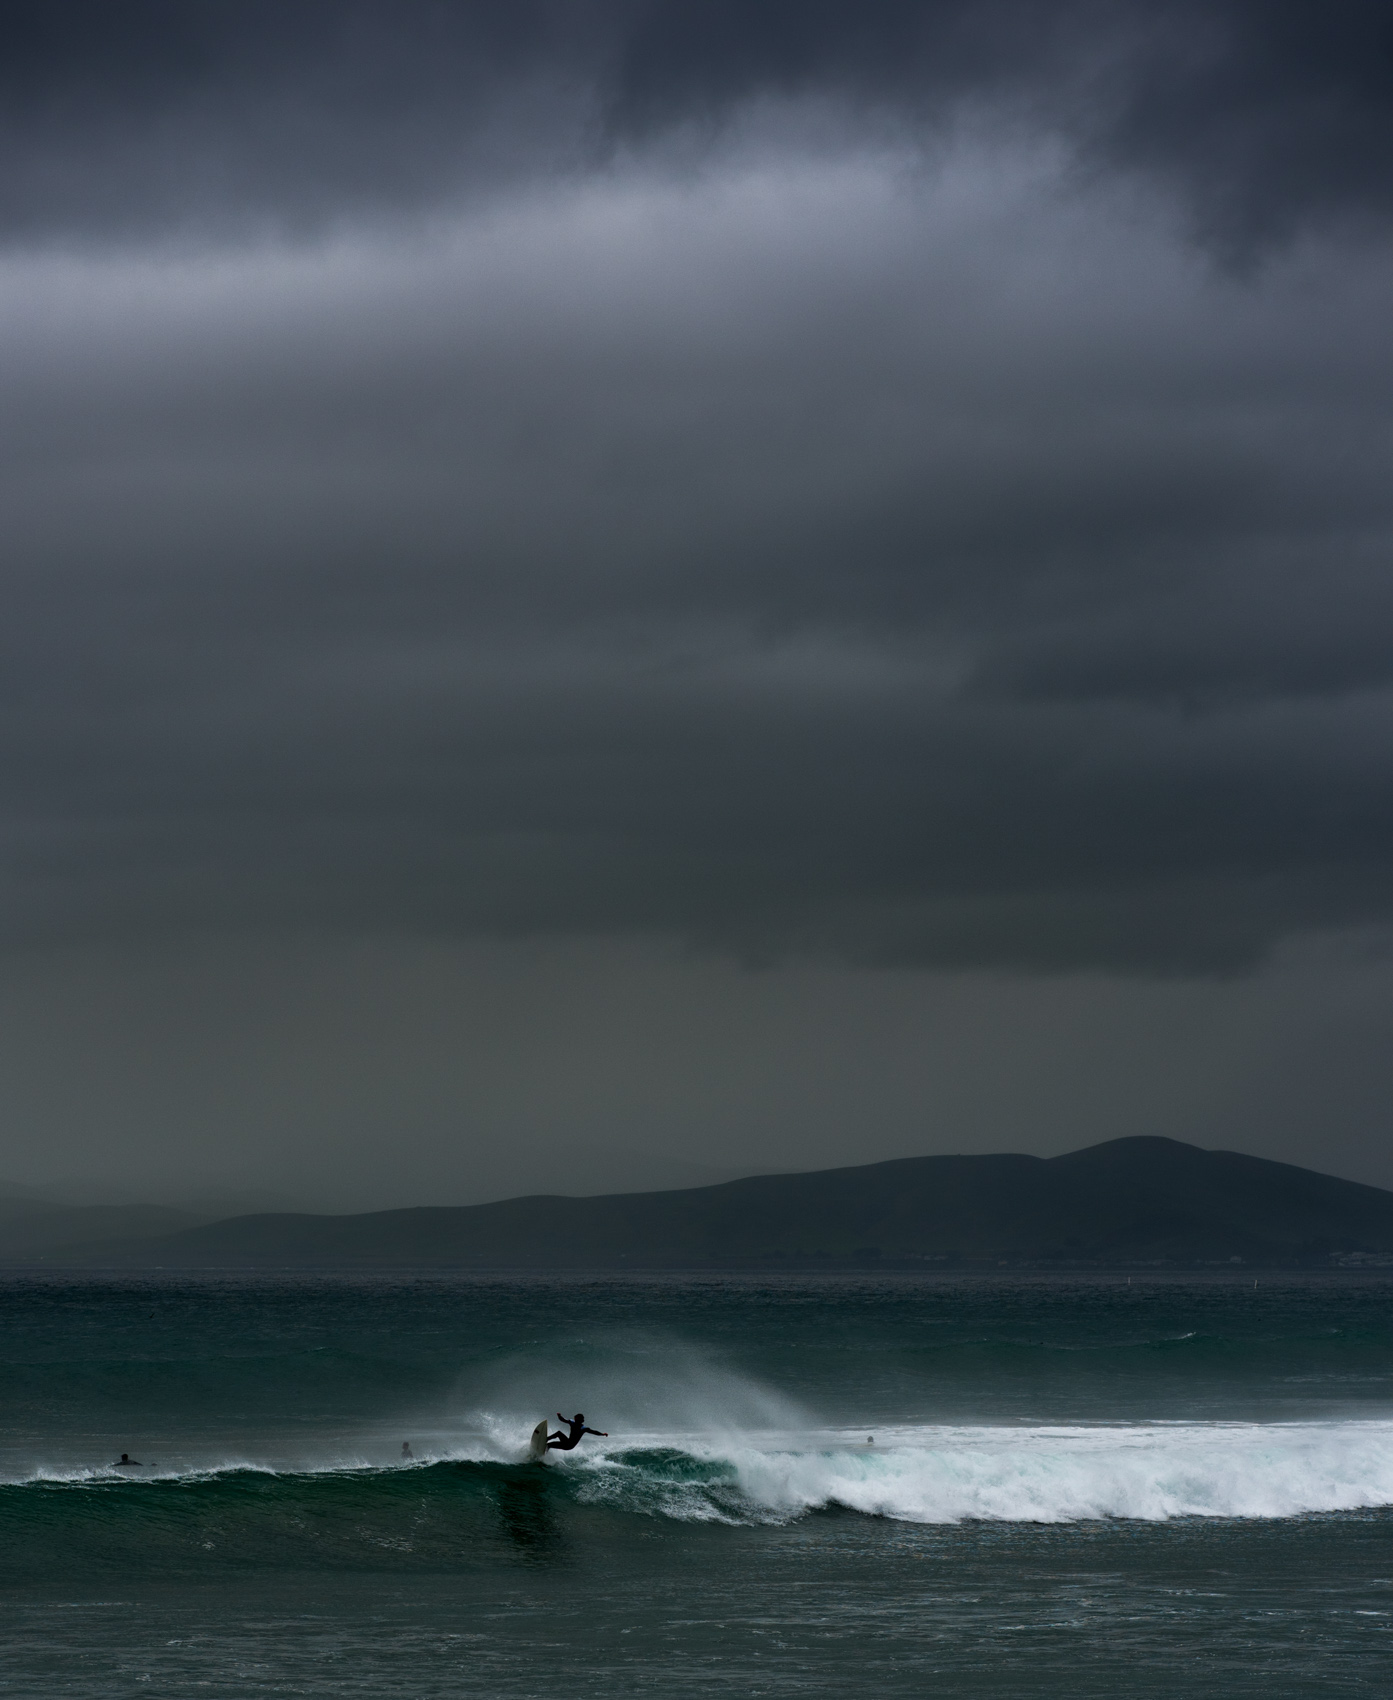 A surfer catches a wave under overcast skies as a rain storm approaches  in Morro Bay, Calif.